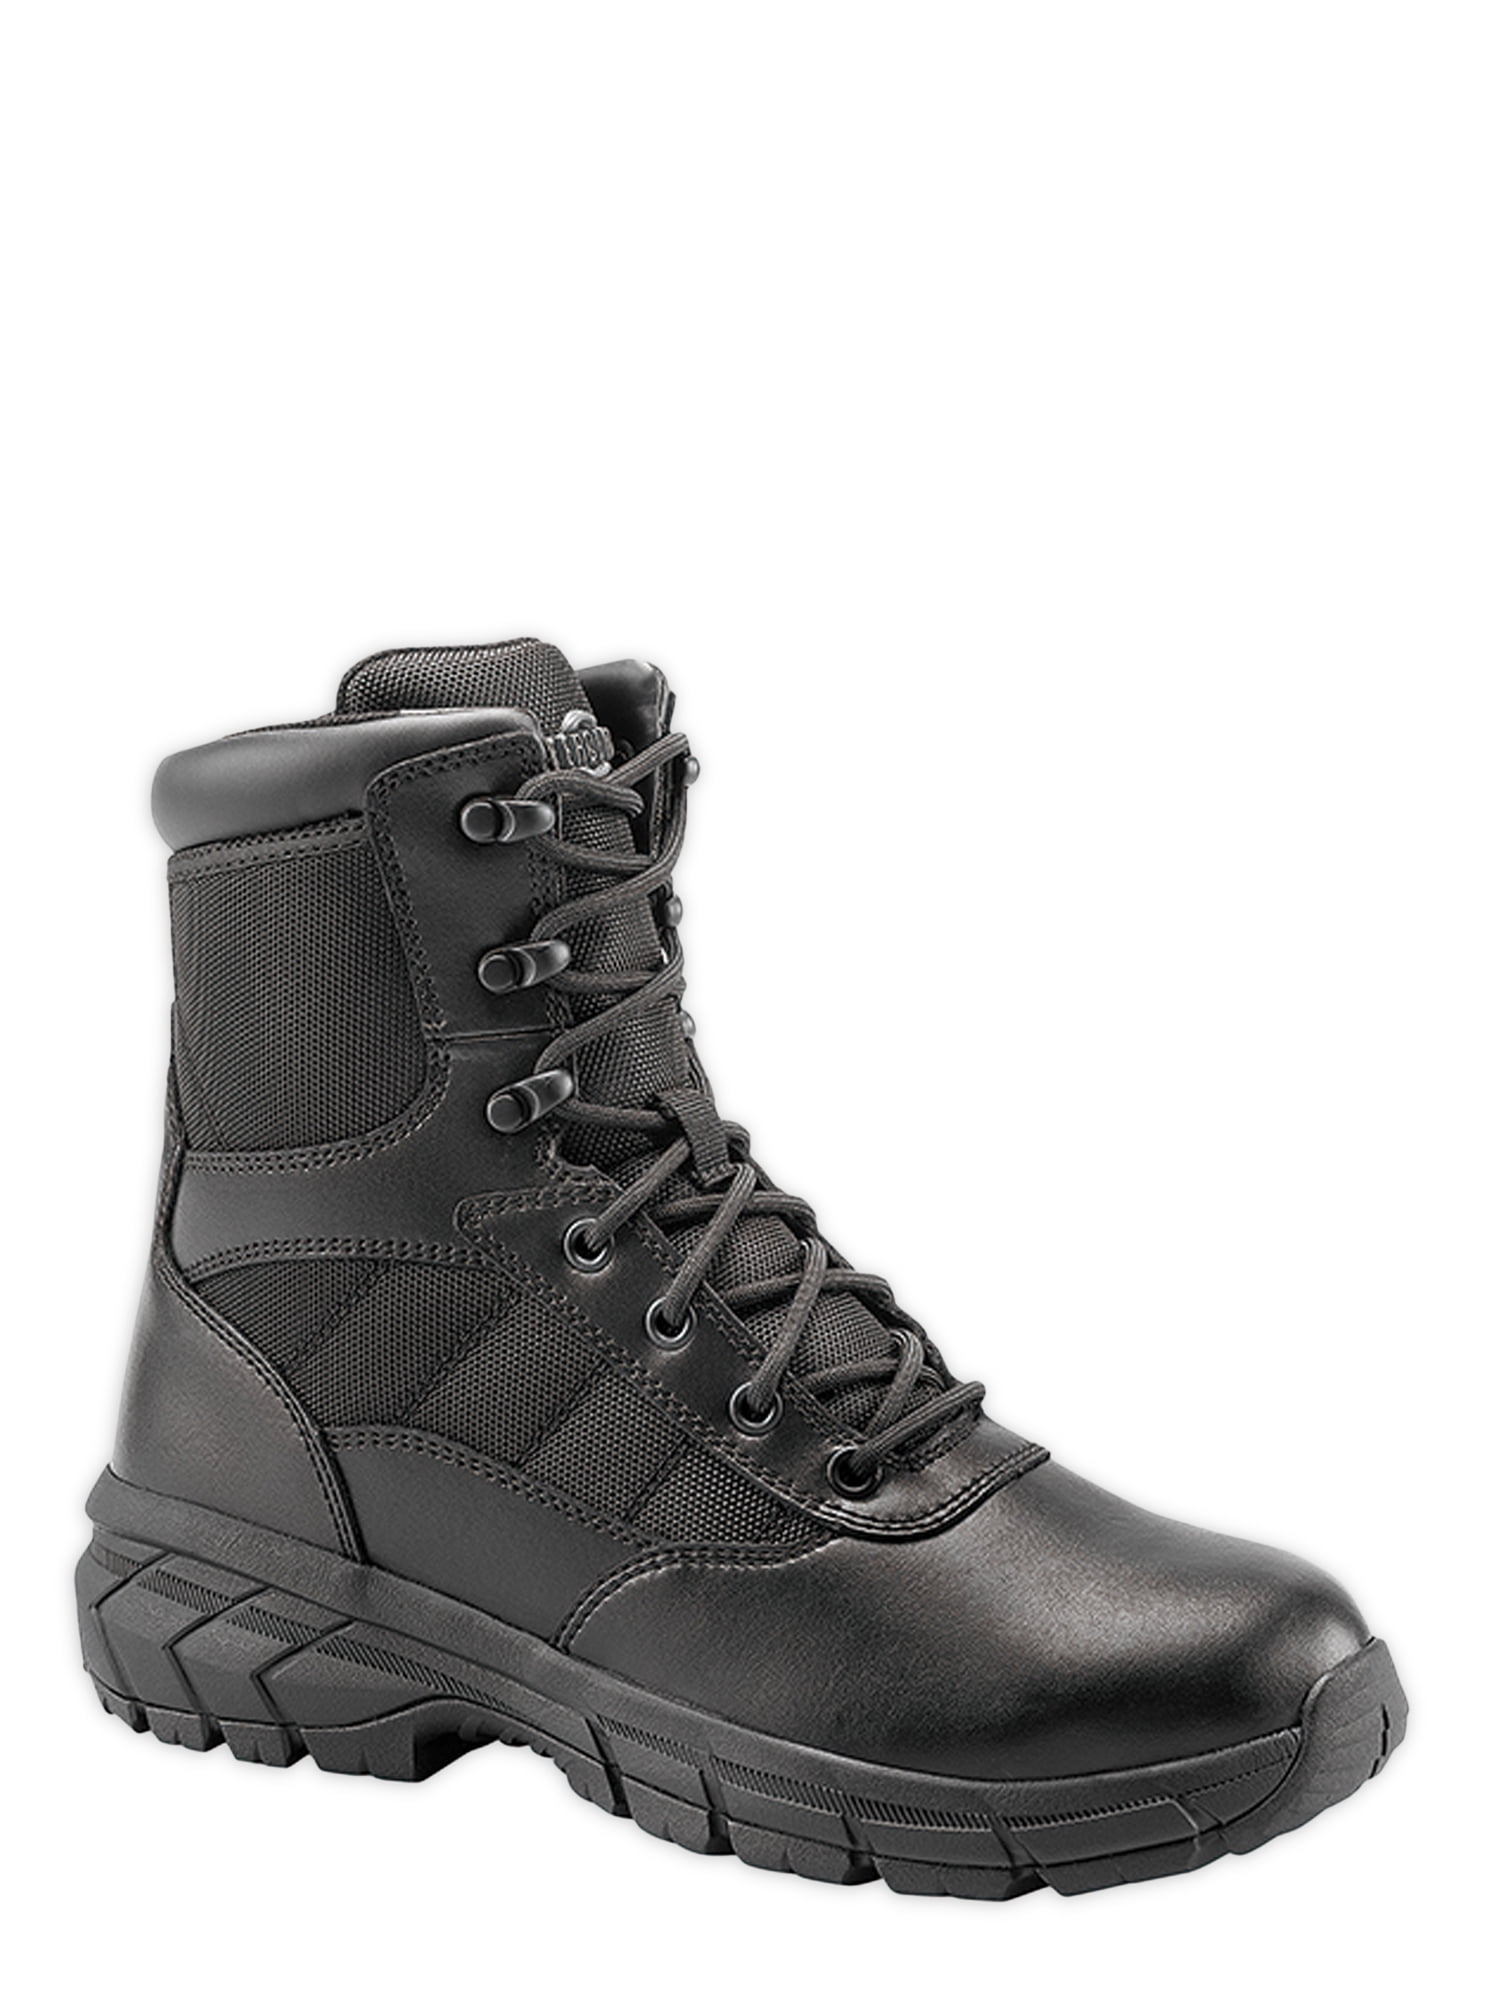 Men's Interceptor Force Steel Toe Work Boots Tactical Boots Black Lace Up 05 